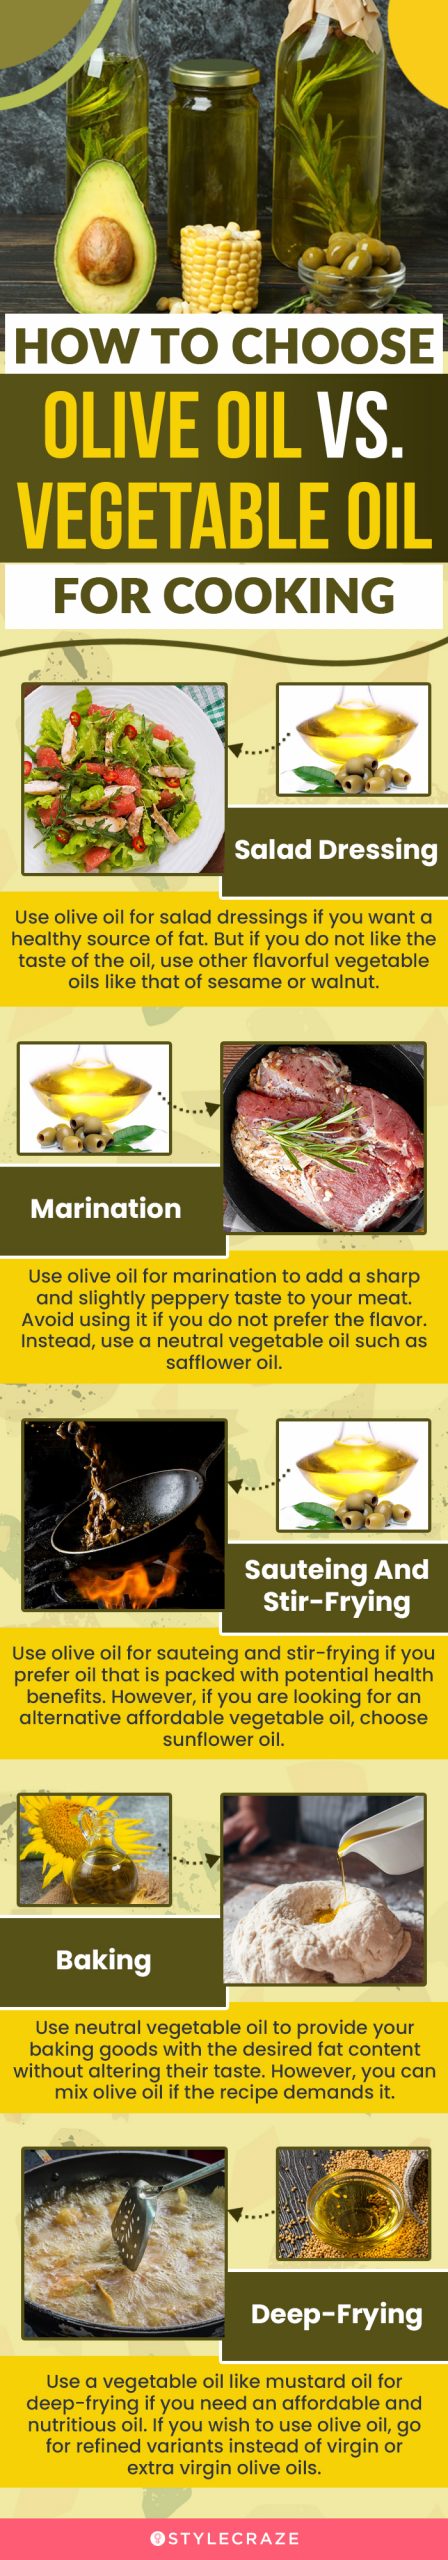 how to choose olive oil vs. vegetable oil for cooking (infographic)